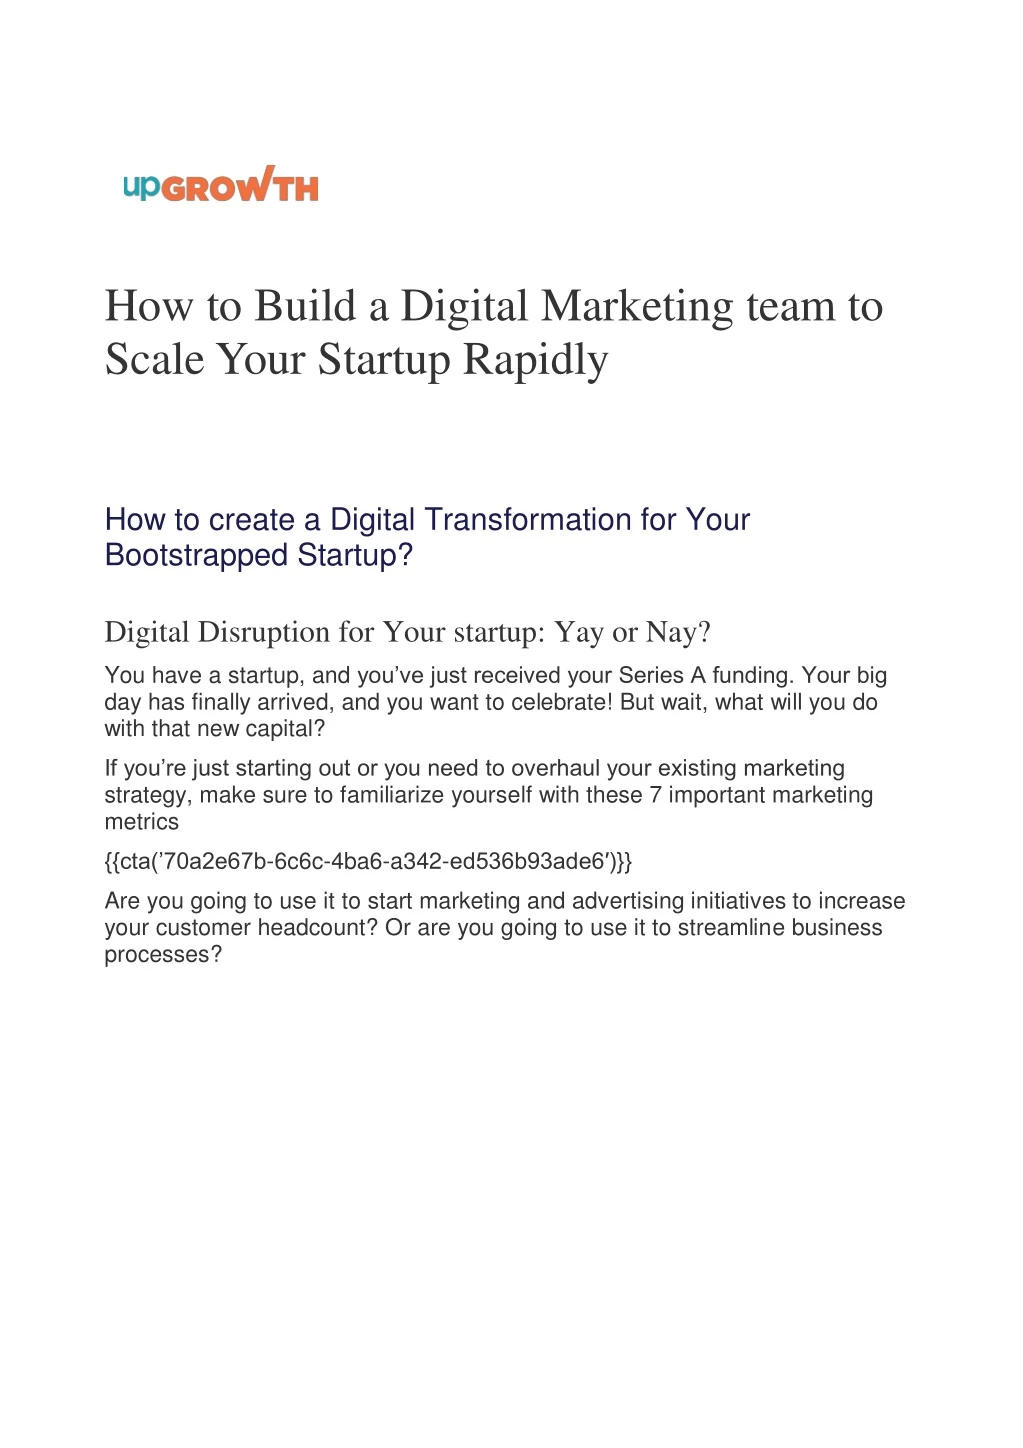 how to build a digital marketing team to scale